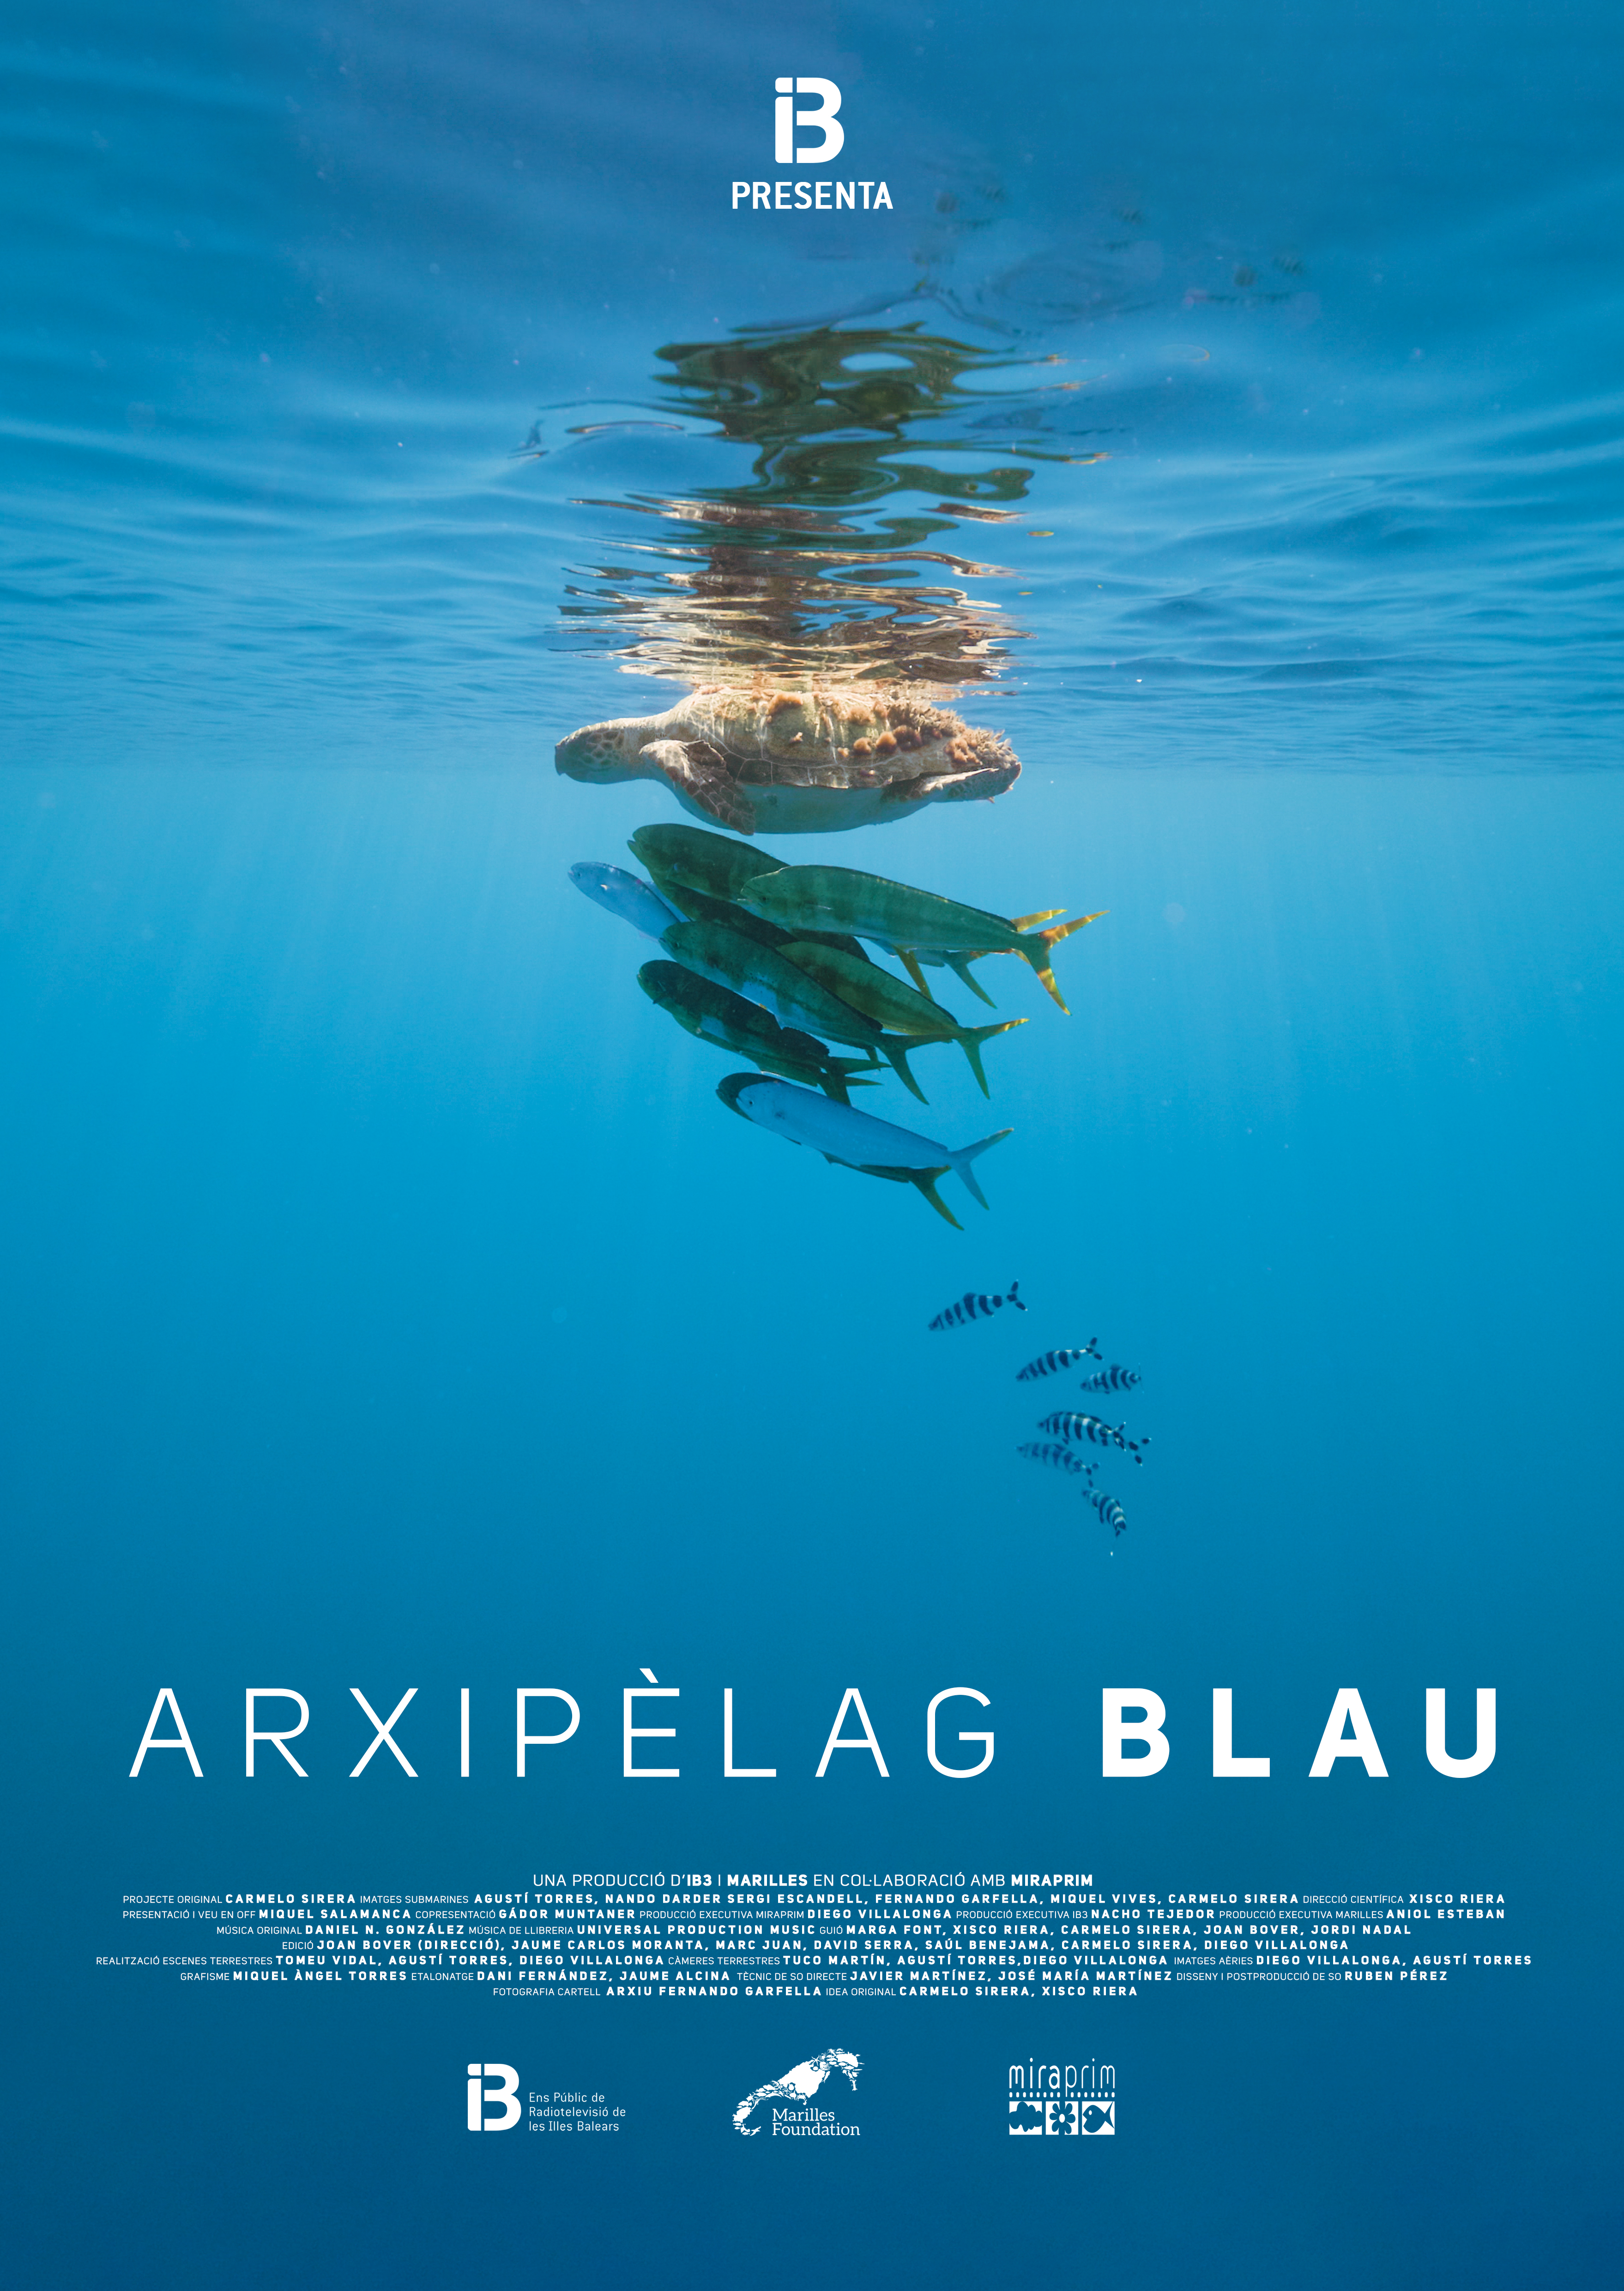 Es Baluard hosts the preview of the documentary series 'Arxipèlag Blau', produced by IB3 and the Marilles Foundation